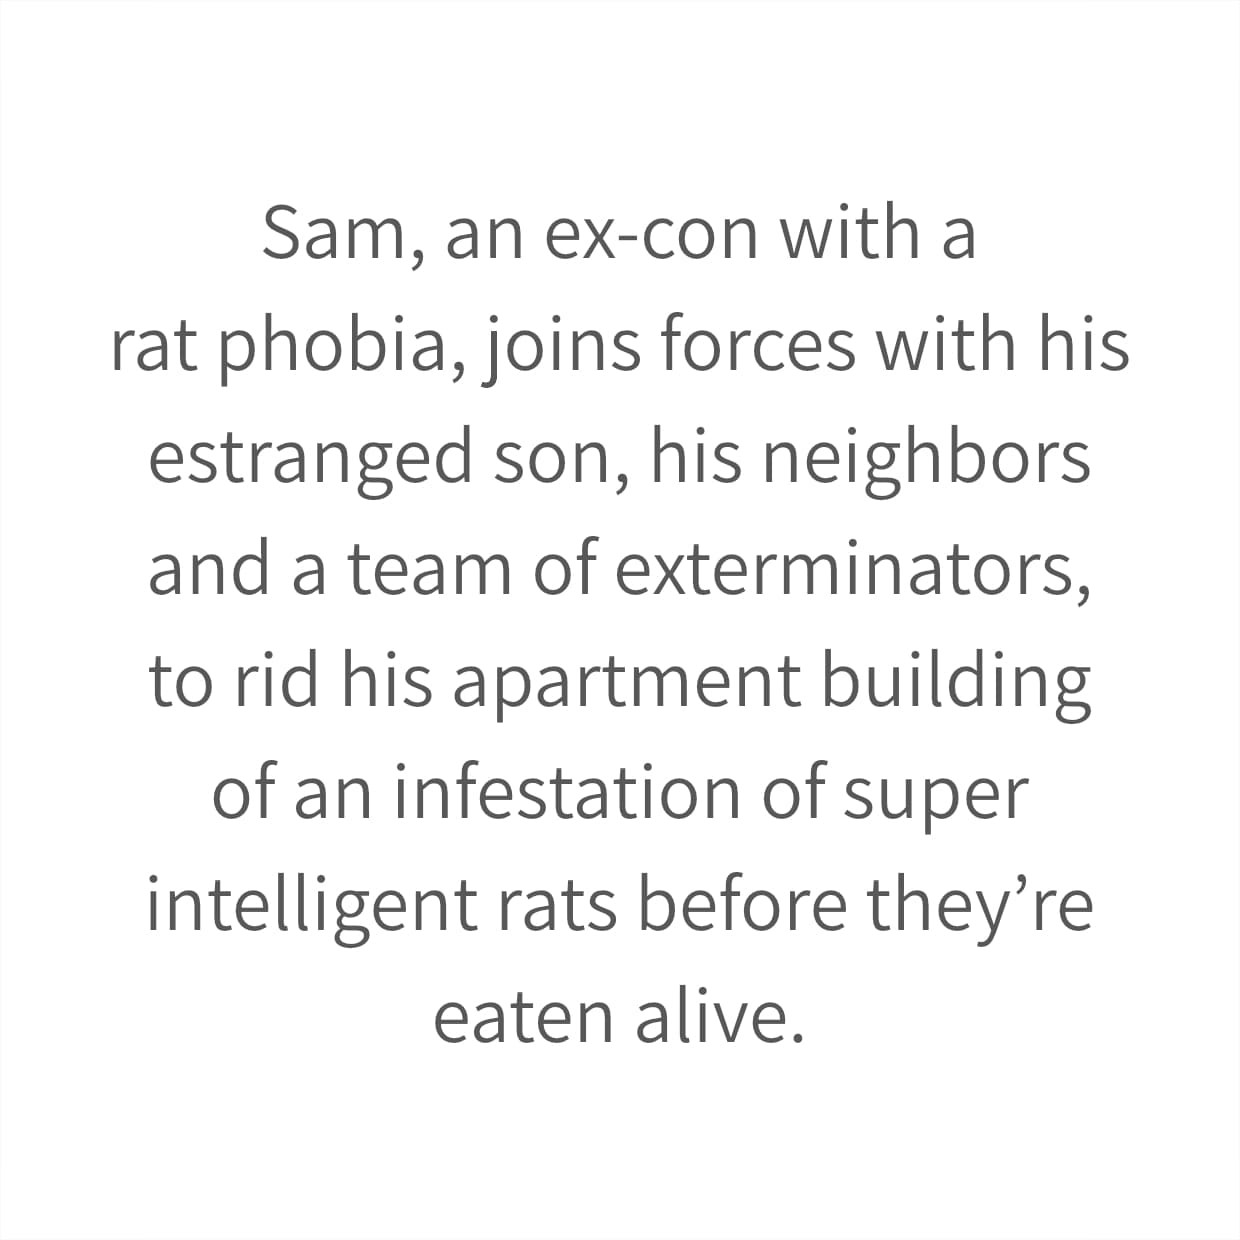 Sam, an ex-con with a rat phobia, joins forces with his estranged son, his neighbors and a team of exterminators, to rid his apartment building of an infestation of super intelligent rats before they’re eaten alive.